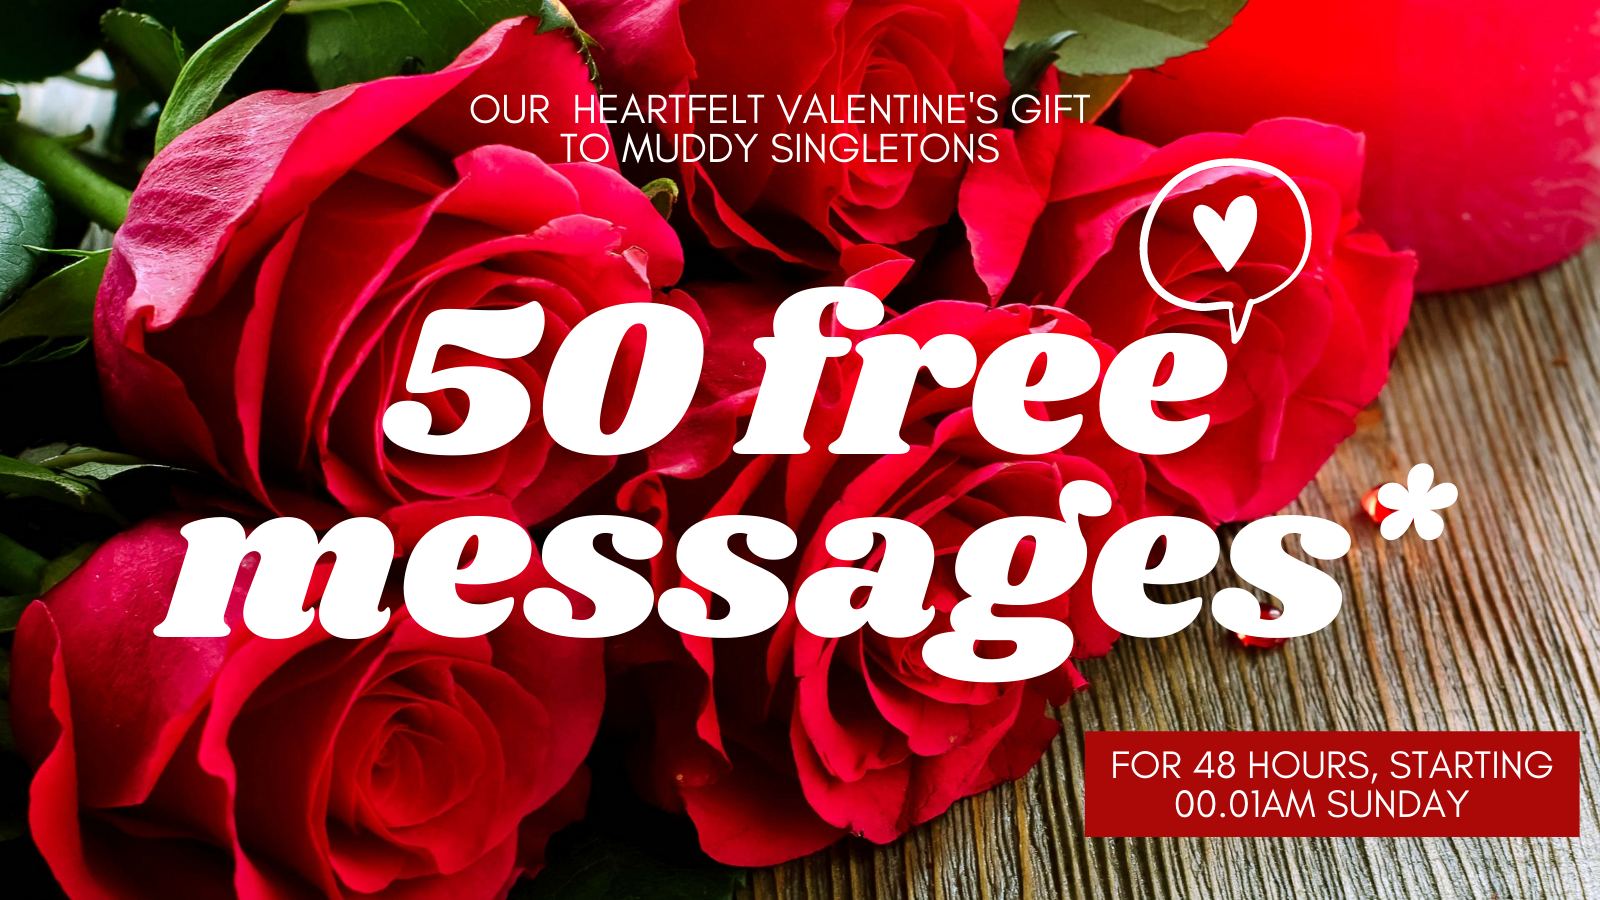 Be my virtual Valentine? Muddy Matches gift 50 free messages to all singletons